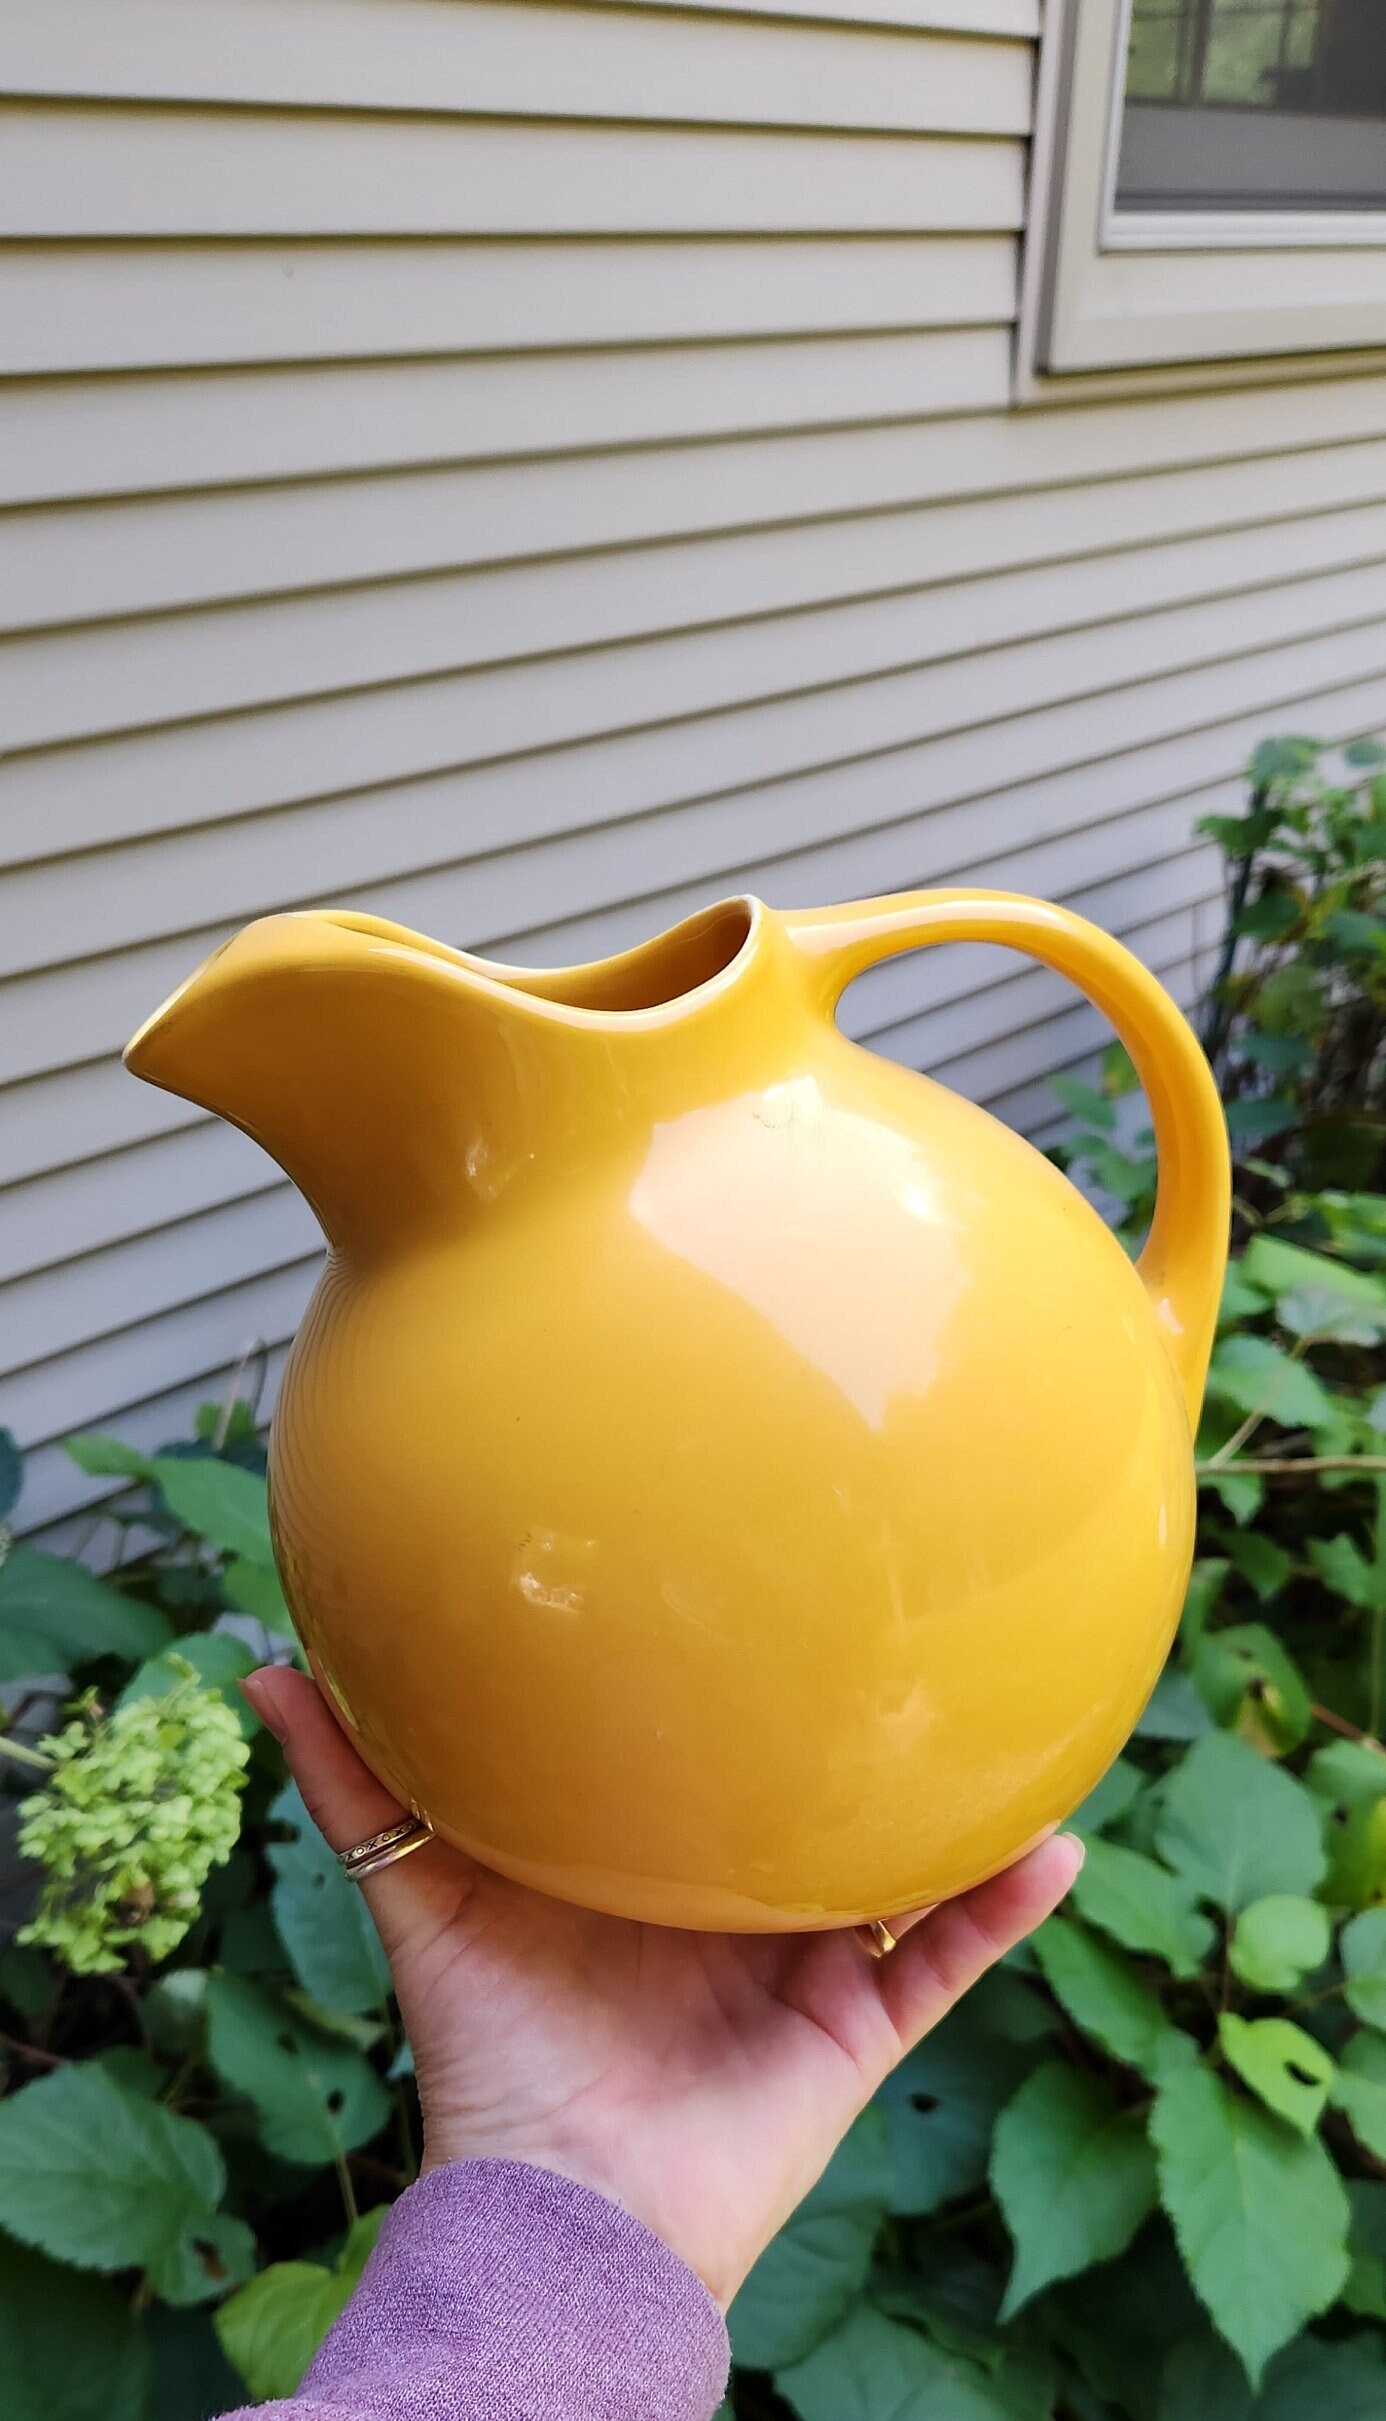  Ceramic Sangria Pitcher from Spain. Fiesta Yellow Pattern :  Home & Kitchen